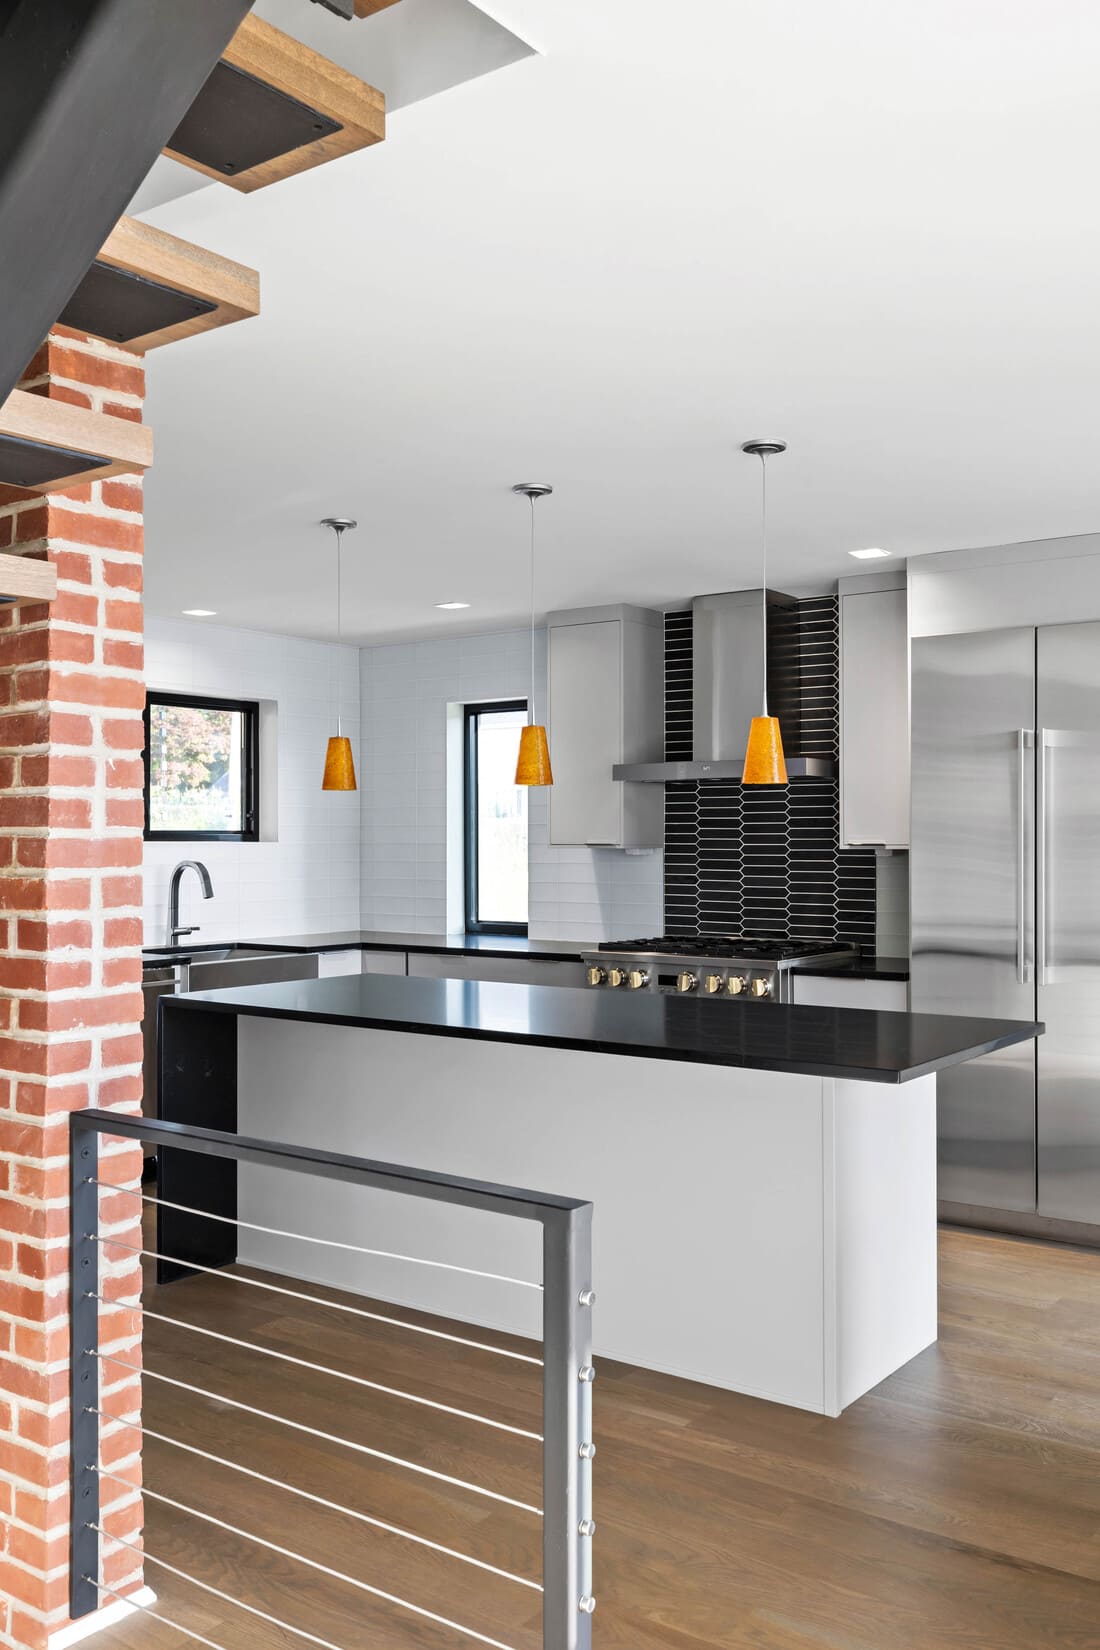 View of black and white kitchen island beneath three orange hanging pendant lights by Bromwell Construction